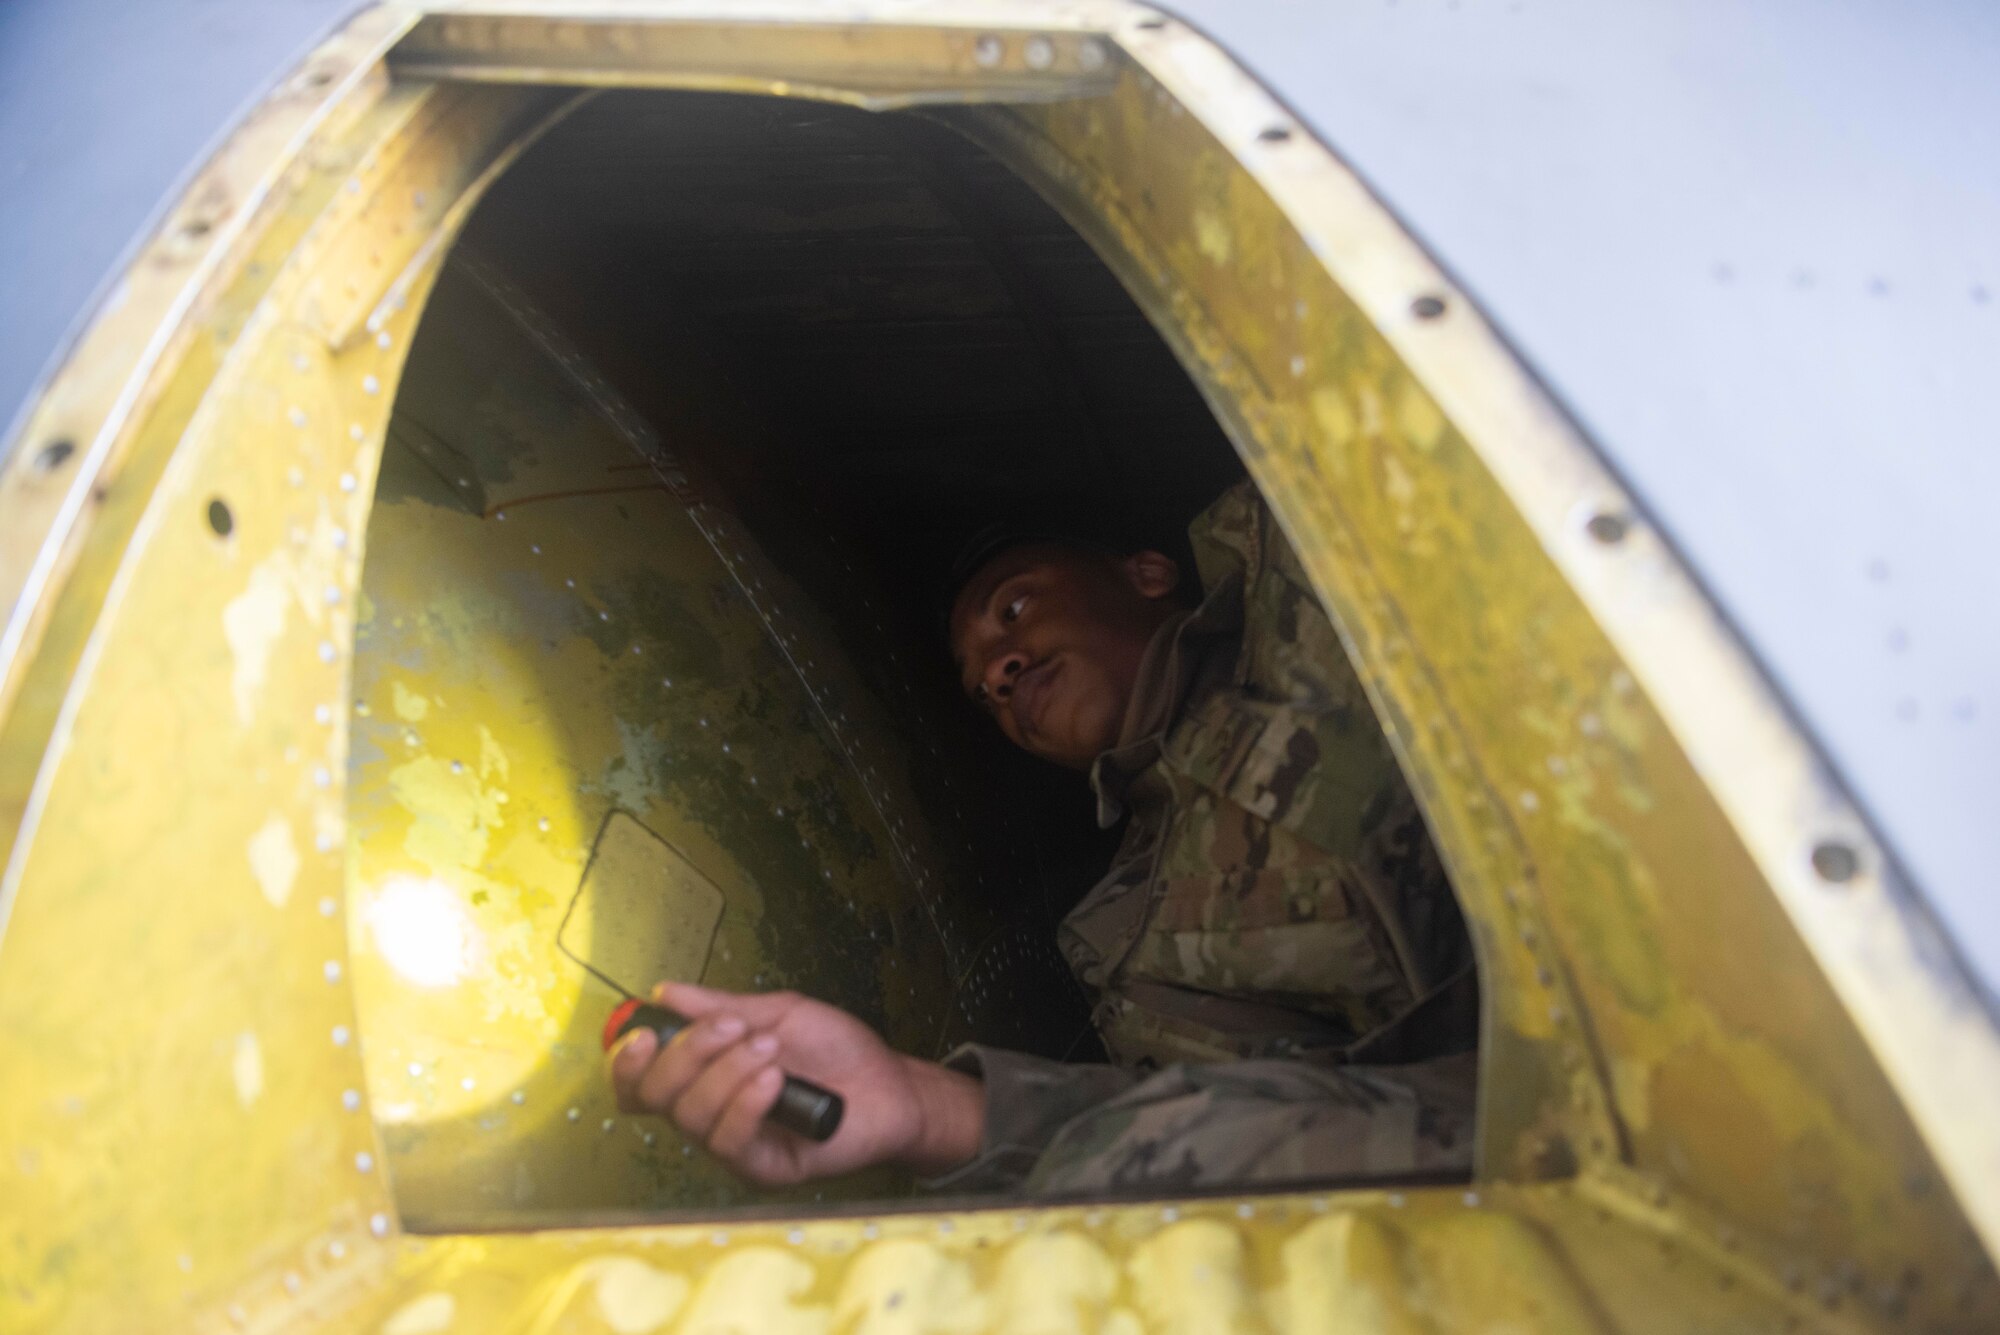 Airman 1st Class Torris Colston, 100th Maintenance Squadron KC-135 Stratotanker crew chief, looks for foreign object debris in the tail compartment of a KC-135 Stratotanker July 28, 2020, at RAF Mildenhall, England. The FOD check improves aircrew safety by confirming unaccounted parts don’t take flight that could impact the operation of the aircraft. (U.S. Air Force photo by Airman 1st Class Joseph Barron)